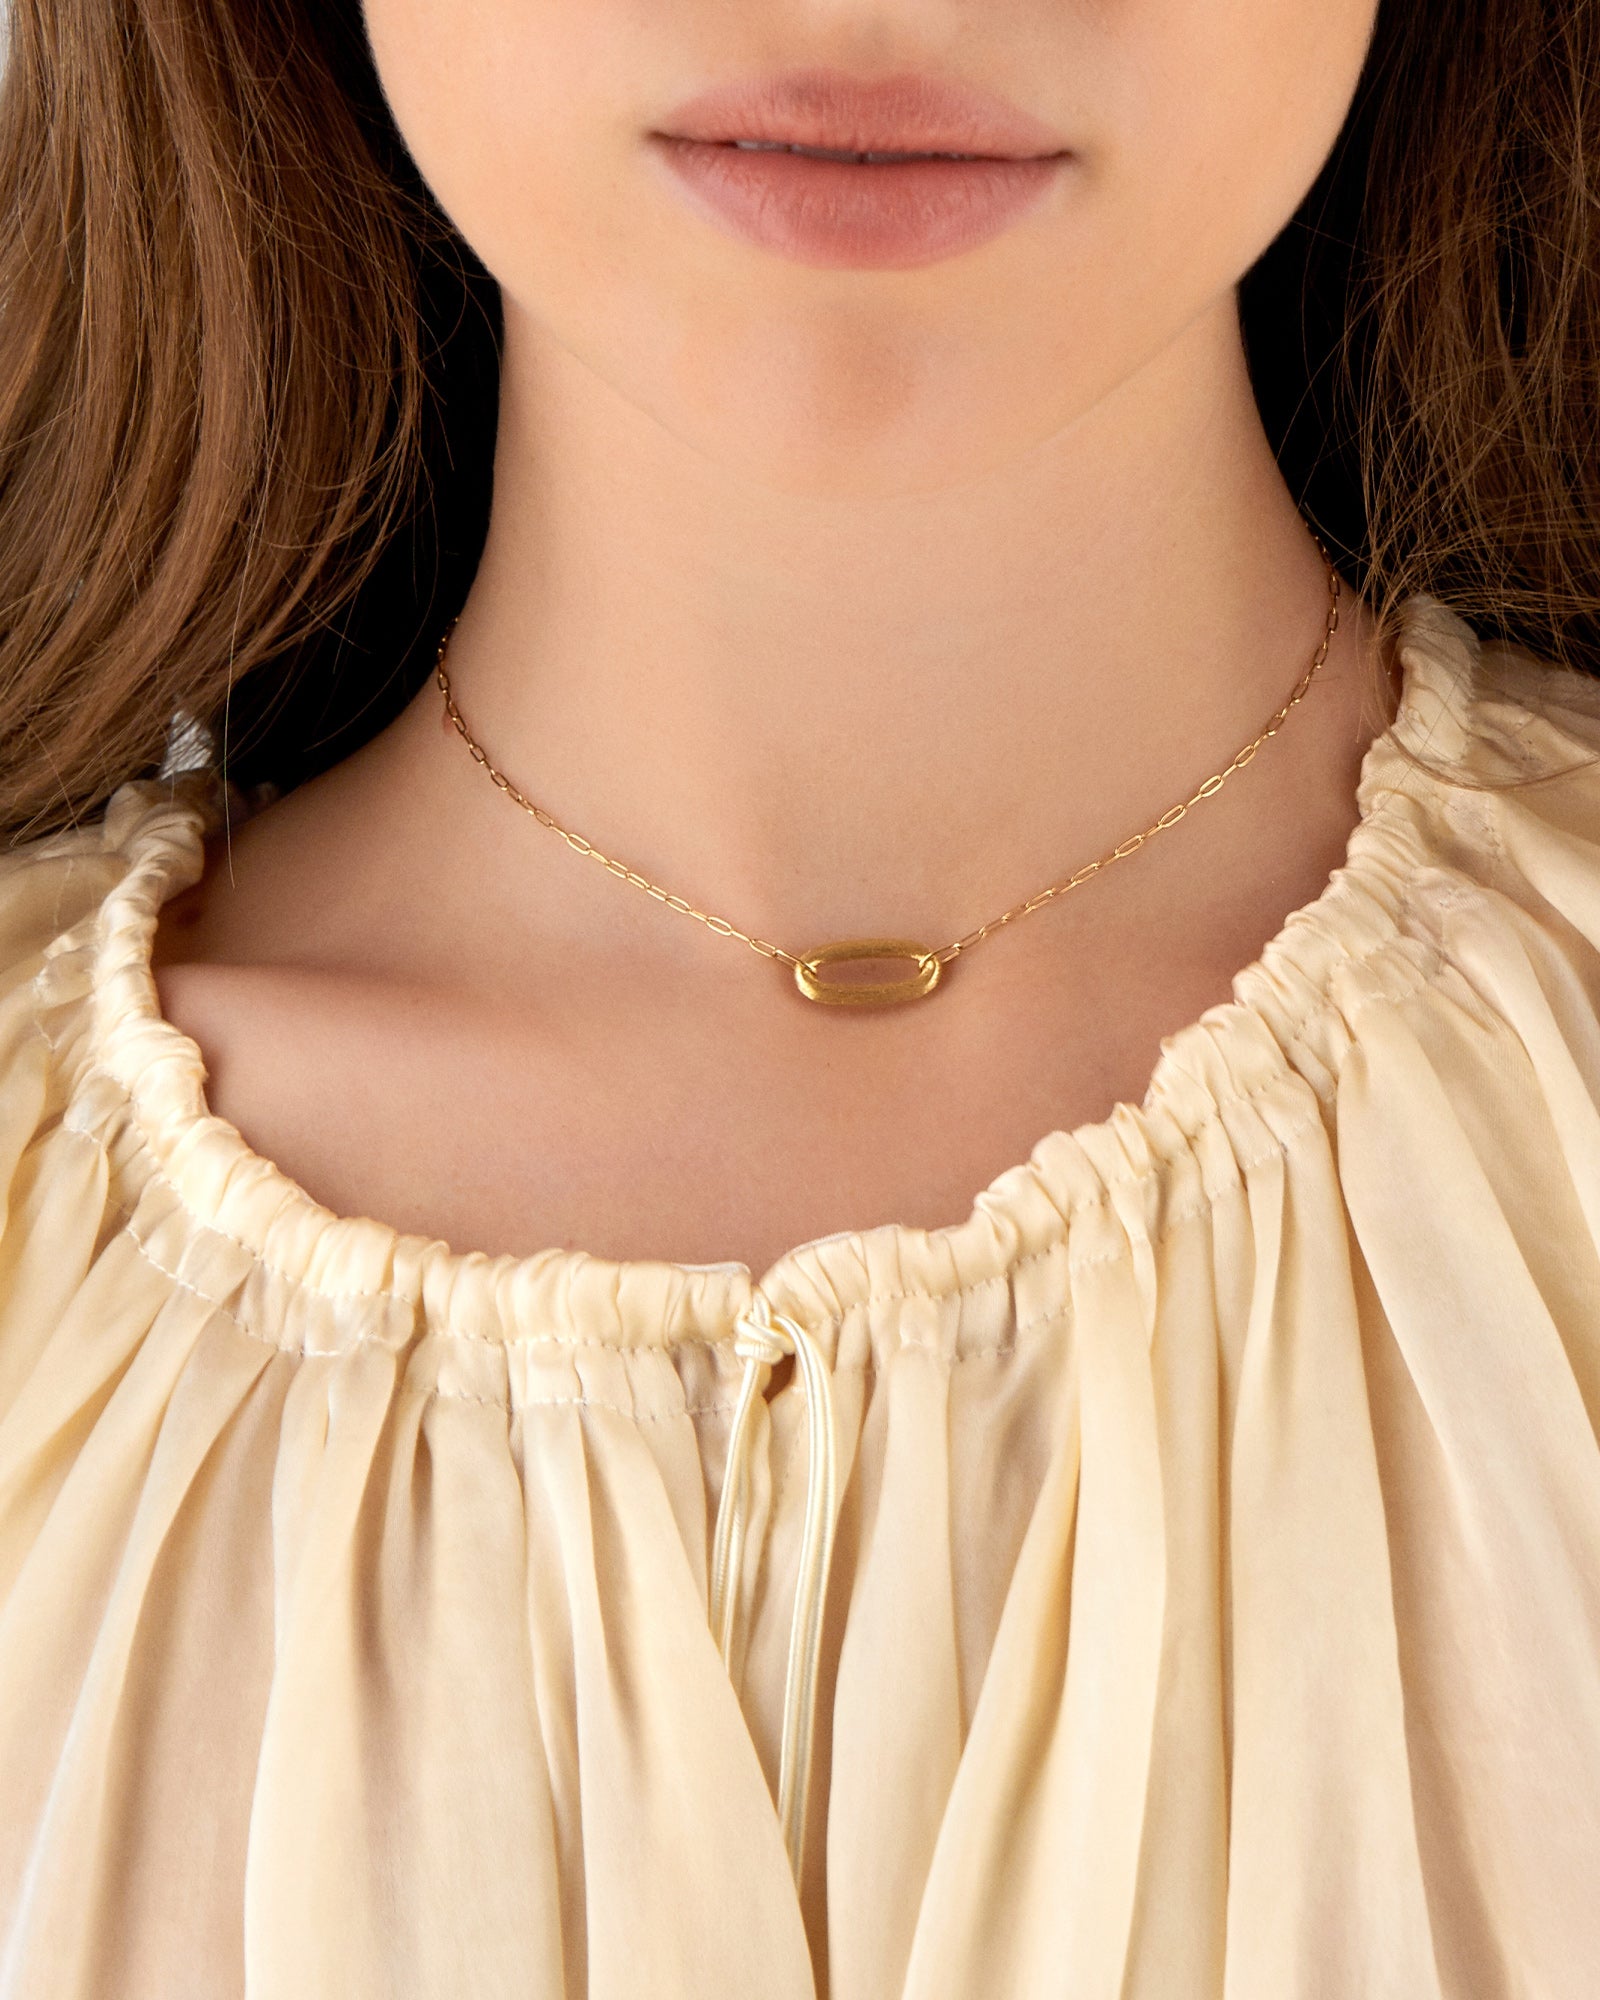 LIBERA Gold oval ring necklace